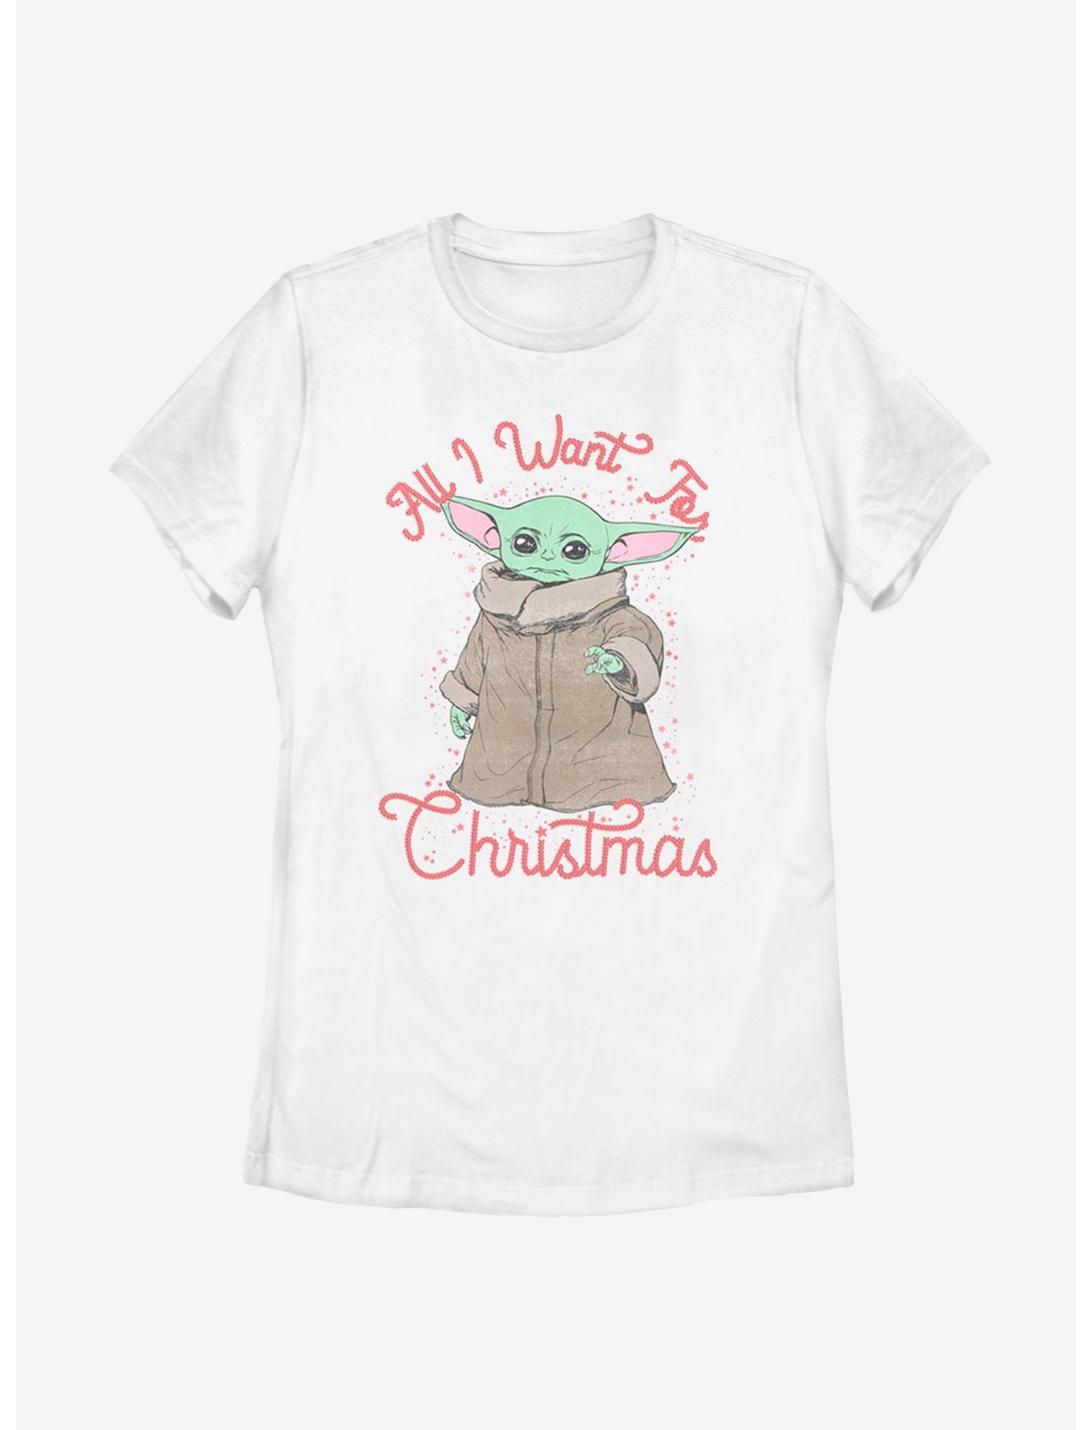 Star Wars The Mandalorian The Child All I Want Christmas Womens T-Shirt, WHITE, hi-res